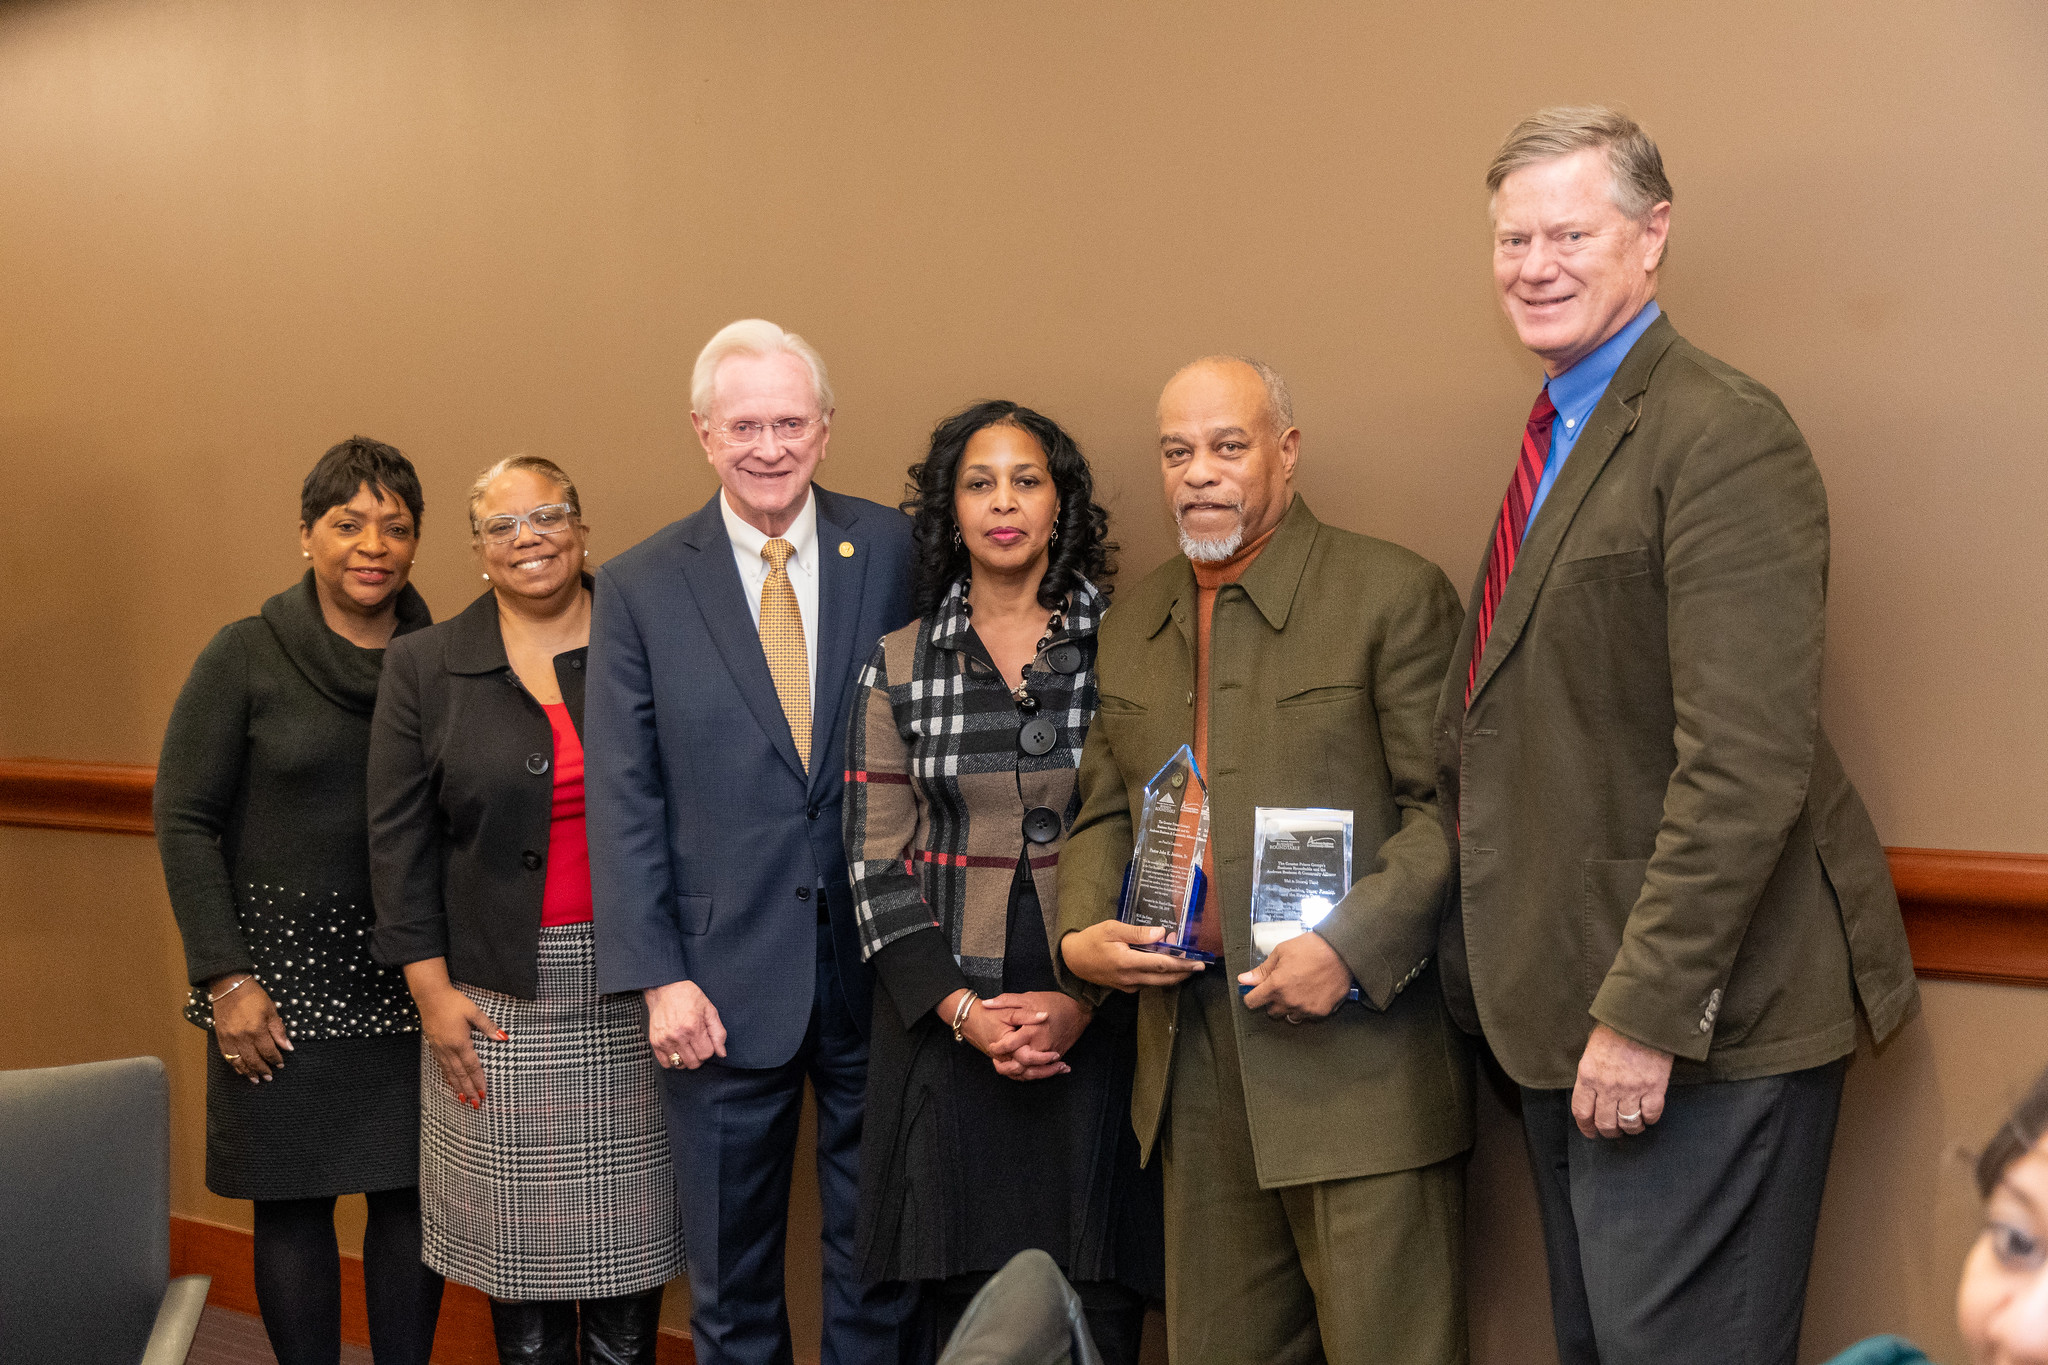 The Roundtable Honors the Host of Our November 2019 meeting Pastor John K. Jenkins (Second from right). He is Joined by the Speaker of the Maryland House of Delegates, Adrienne Jones (Far left), County Councilwoman Deni Taveras (Second from right), Roundtable President/CEO M.H. Jim Estepp (Left center), Roundtable Secretary/Treasurer Donna Cooper (Right center), and Roundtable Board Chair Geoffrey Pohanka (Far right)